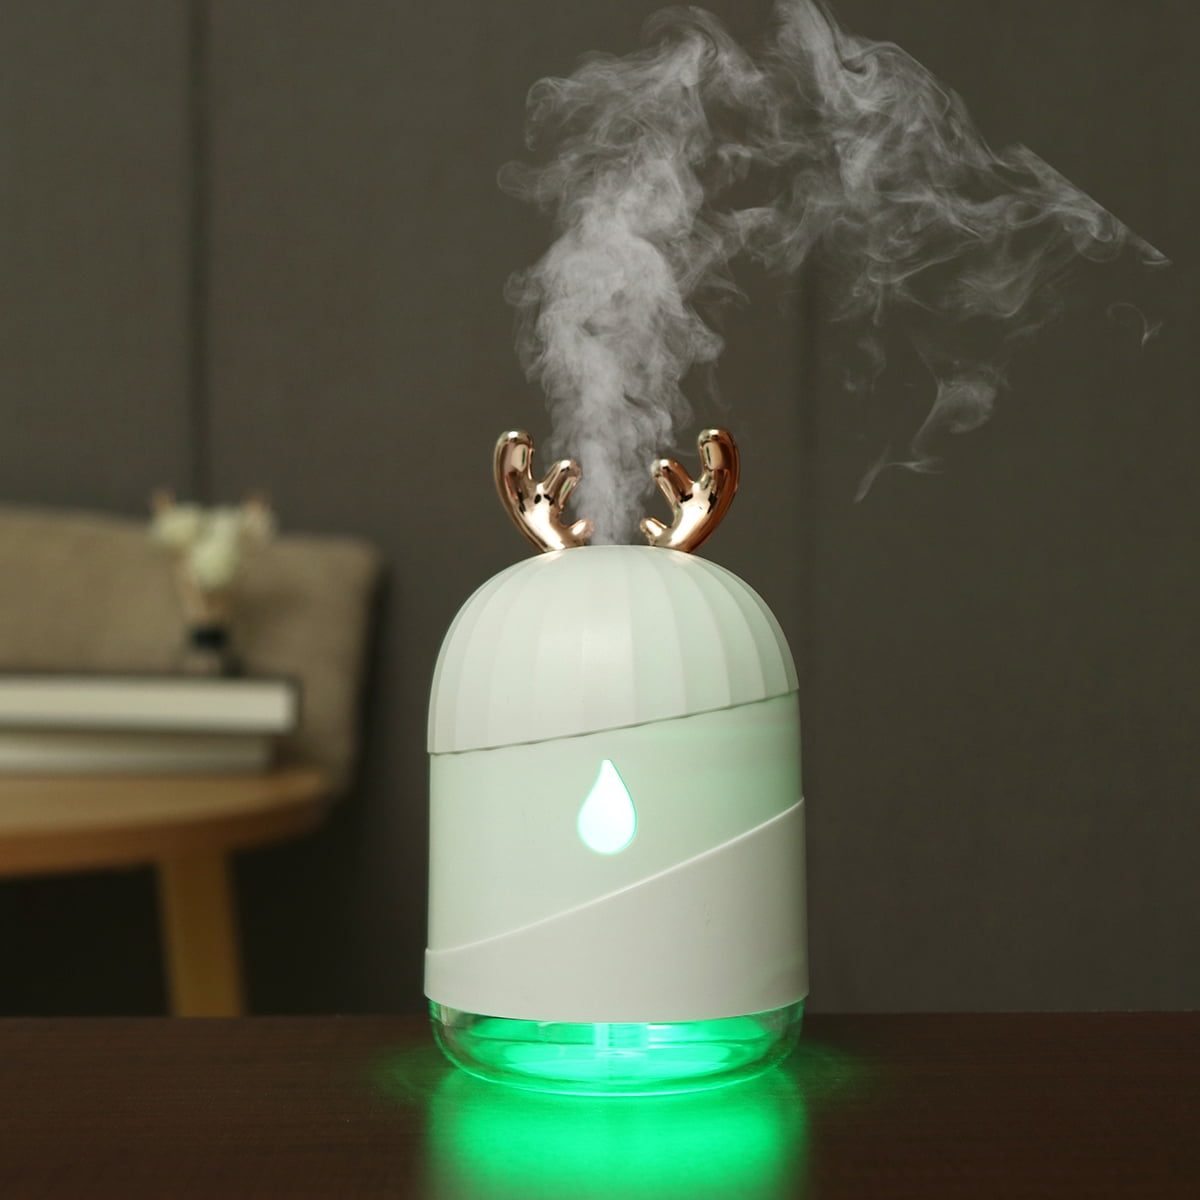 Essential Oil Aroma Diffuser Aromatherapy USB Portable Humidifier Air Purifier